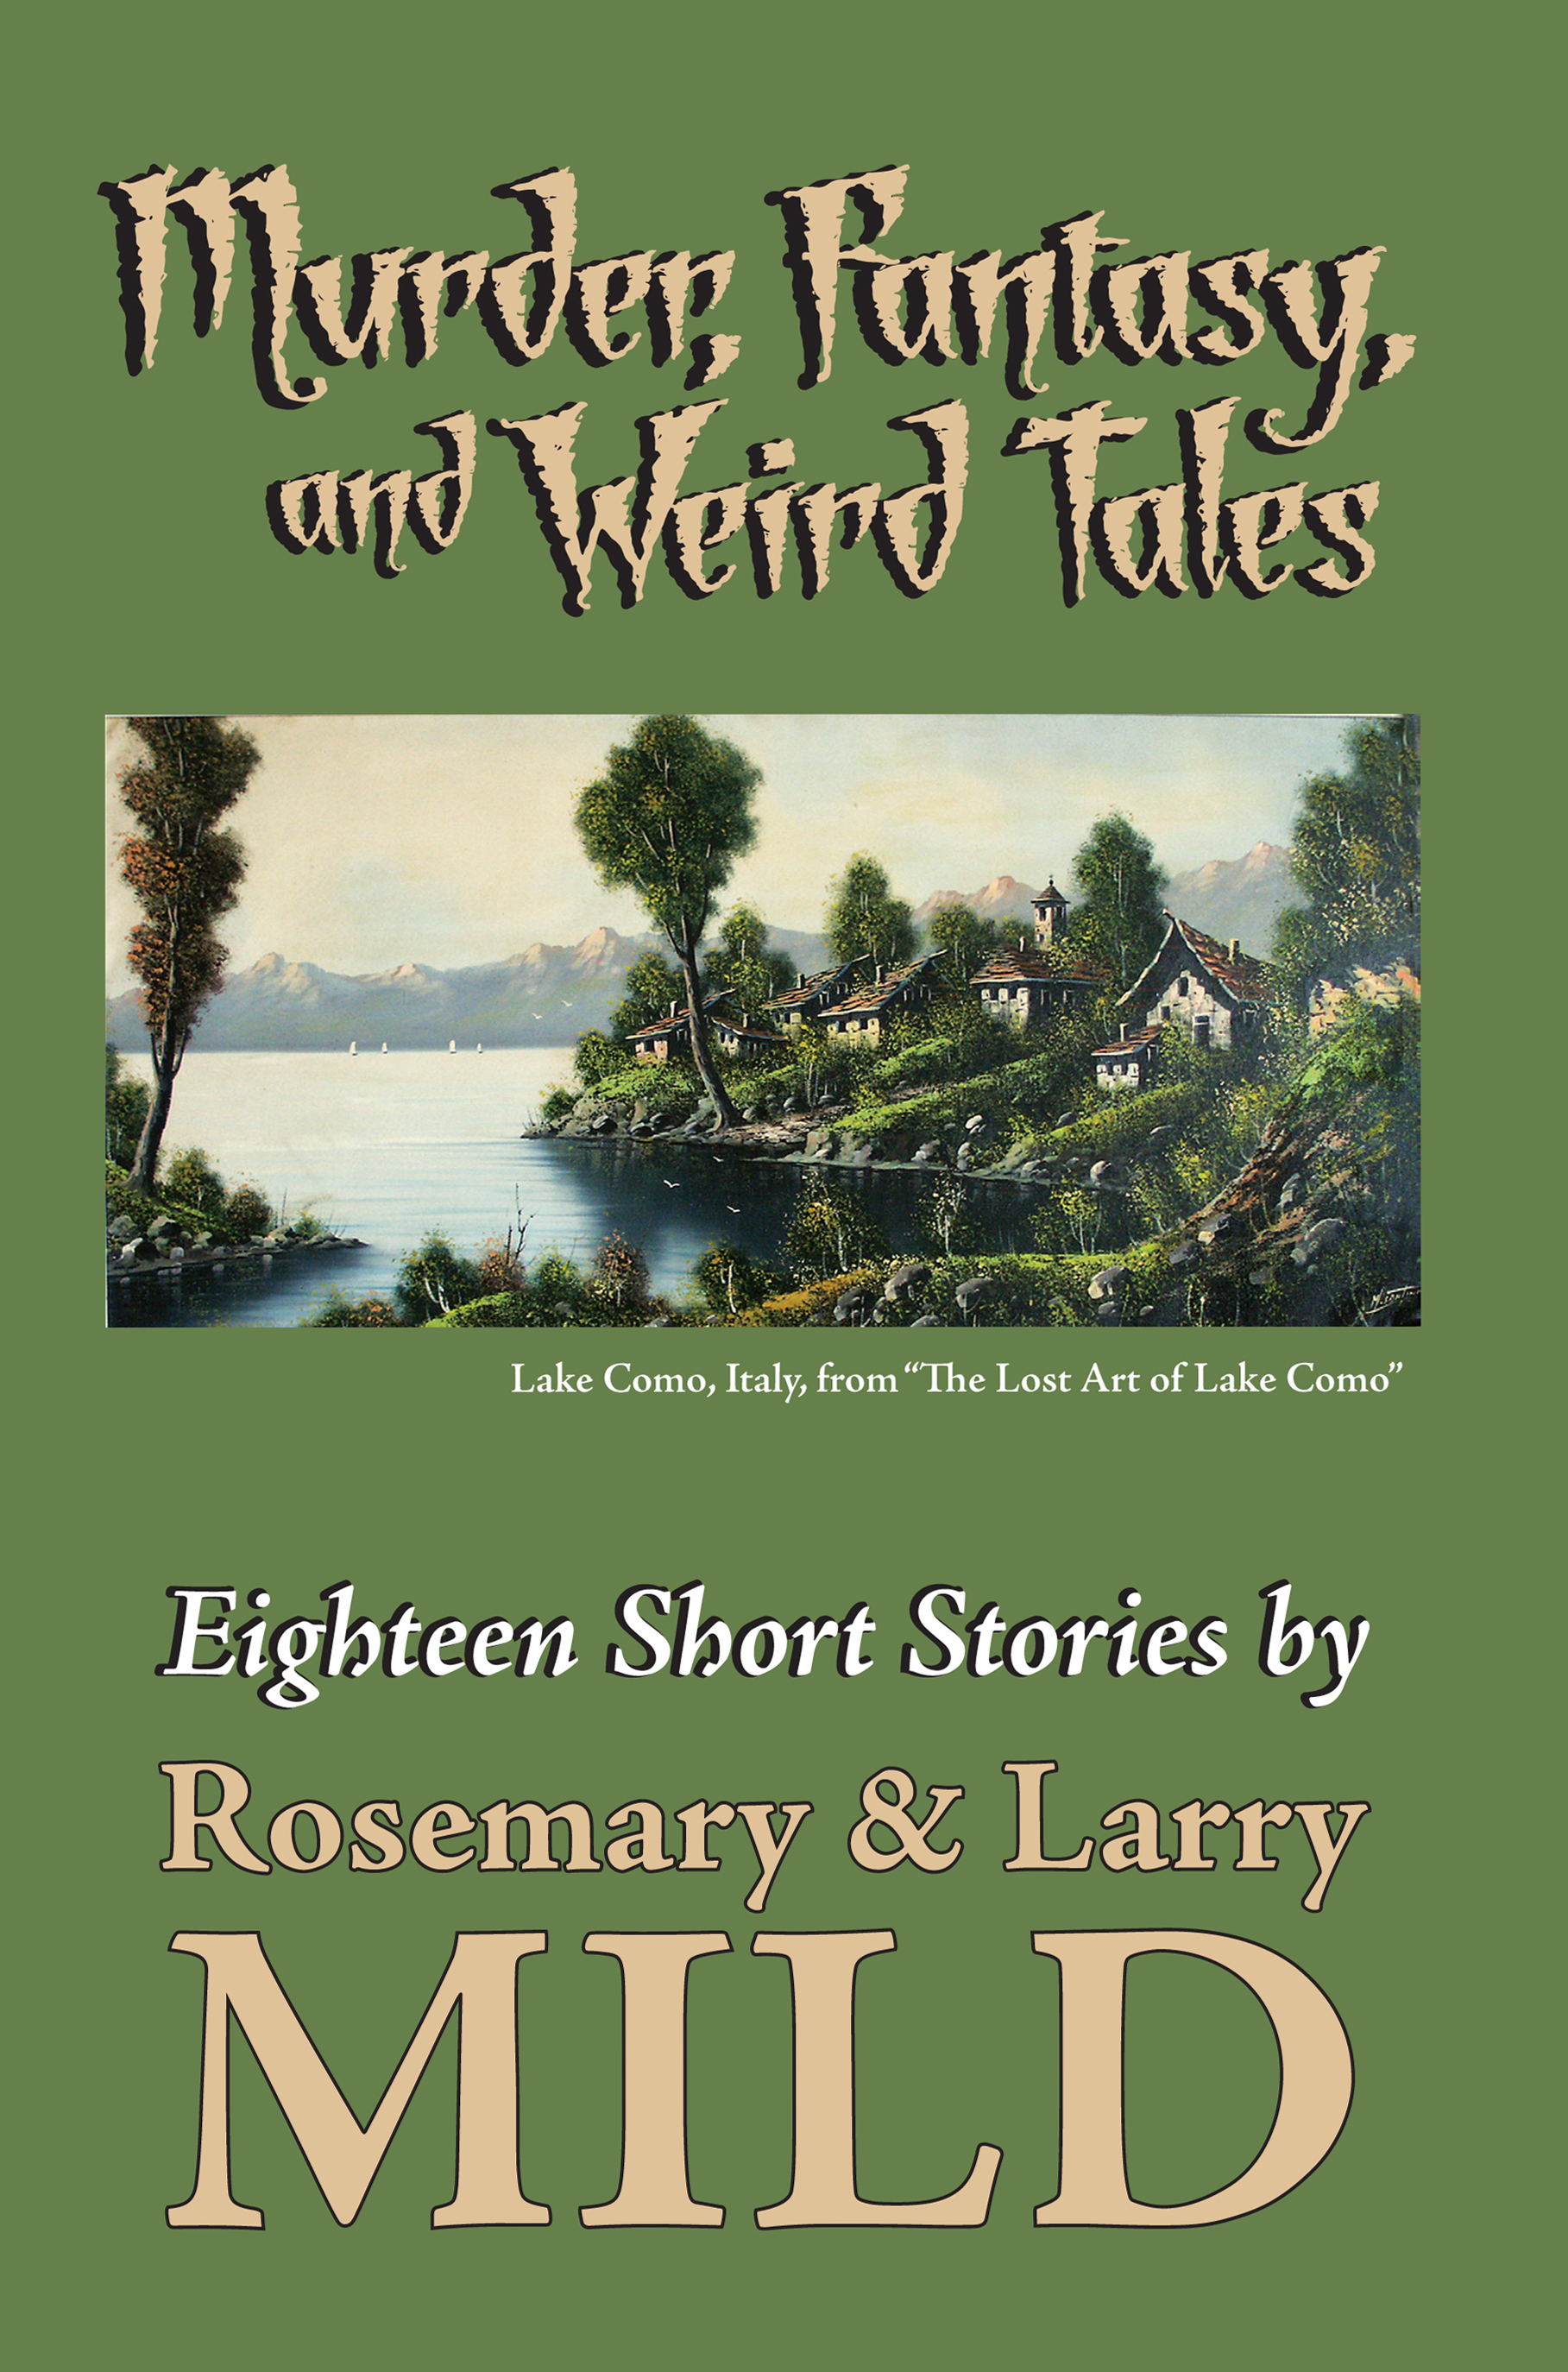 Murder, Fantasy, and Weird Tales by Rosemary and Larry Mild